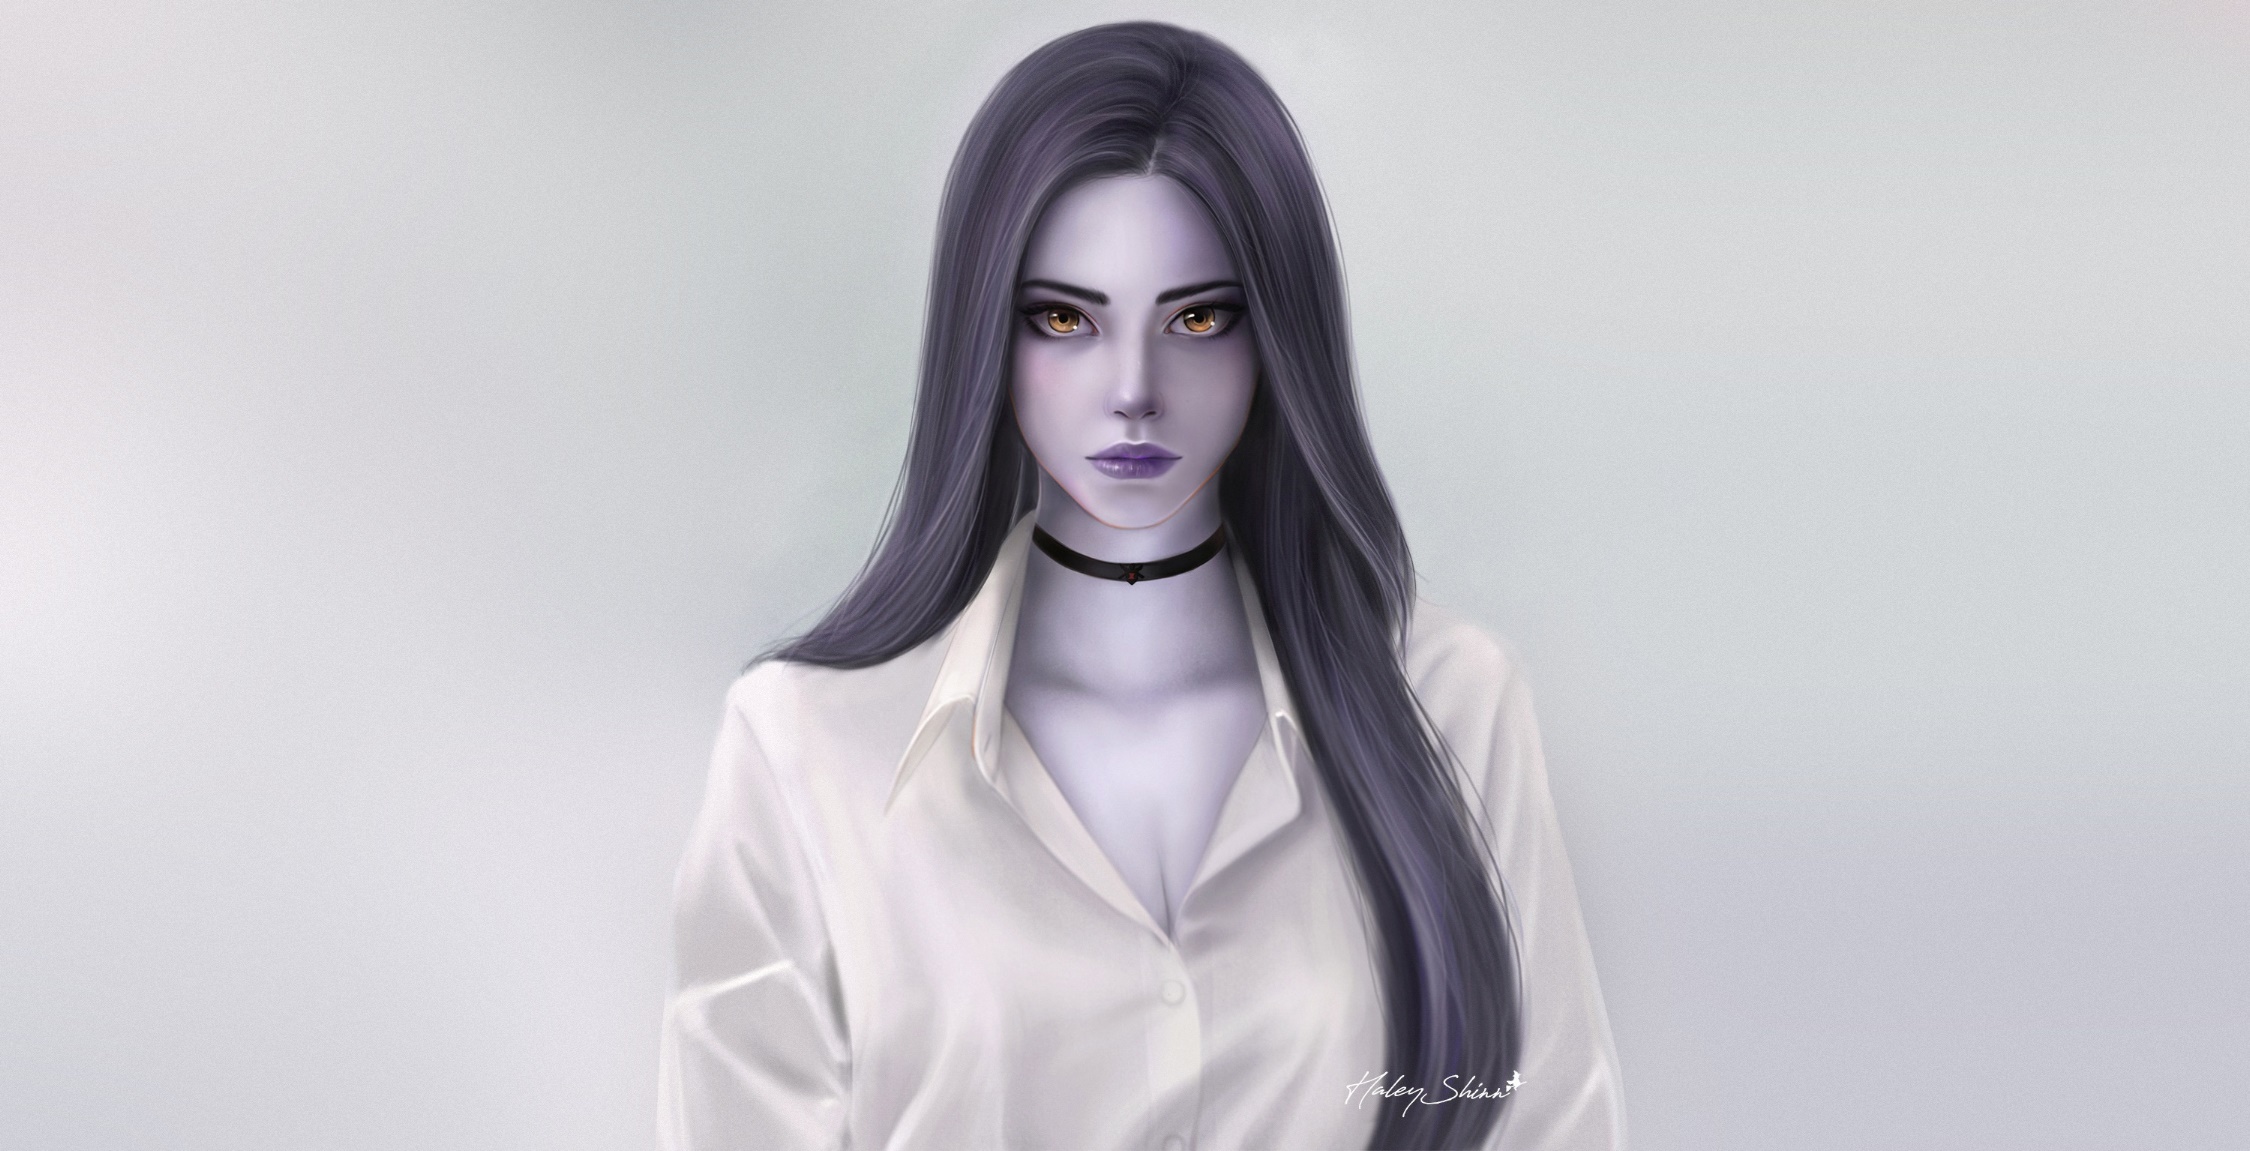 General 2250x1151 women artwork simple background long hair fantasy girl yellow eyes purple lipstick face Widowmaker (Overwatch) cleavage frontal view